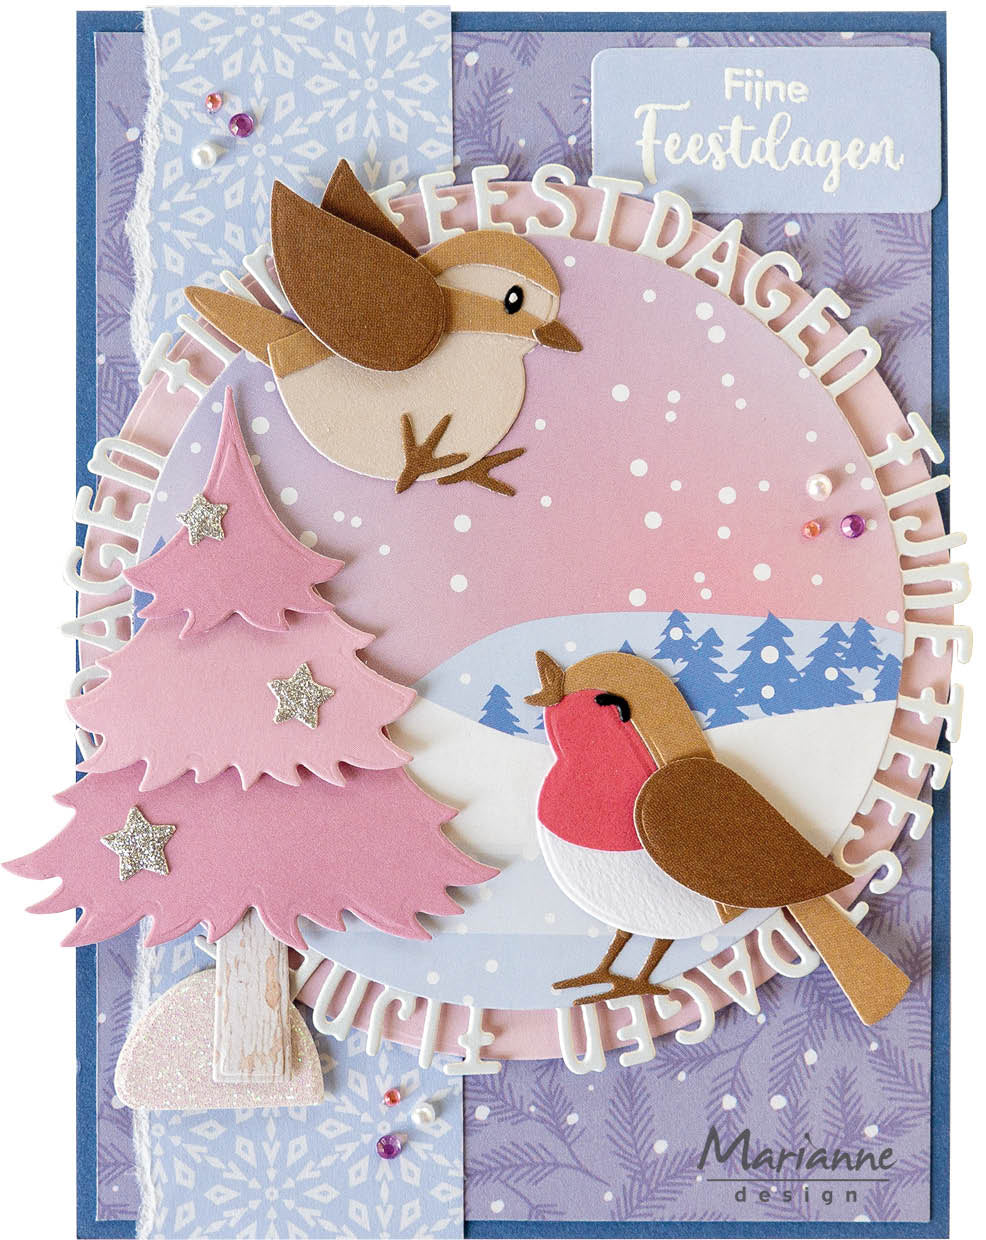 Marianne Design A4 Cutting Sheet - Eline's Winter Dreams Backgrounds